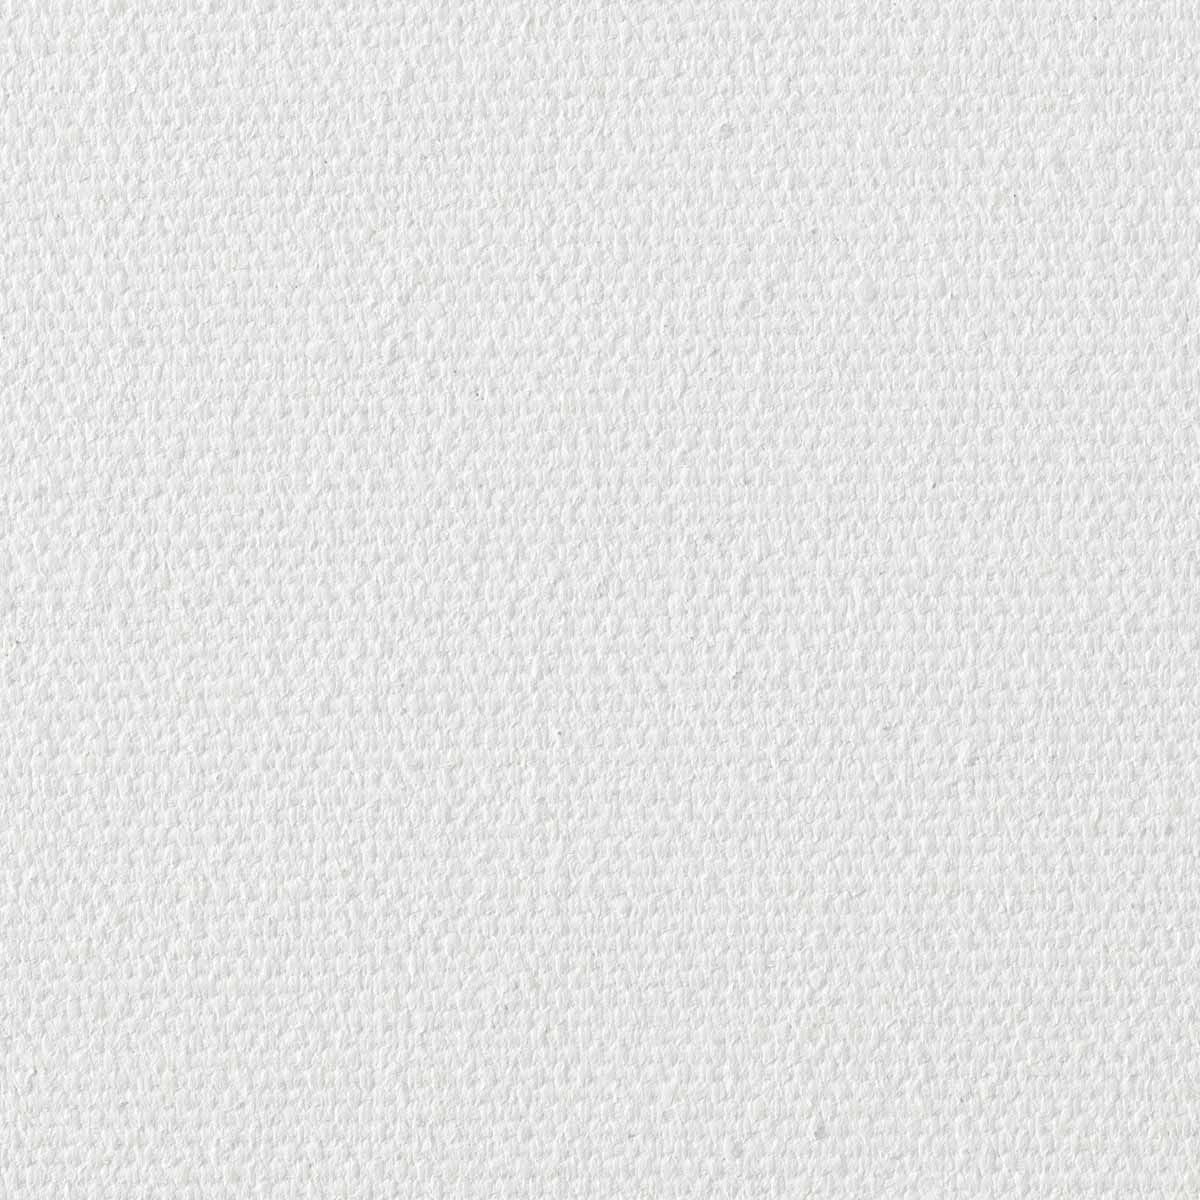 Paramount Oval Stretched Canvas 11x14 - Create a Unique Look with an Oval  Stretch Canvas for Painters, Students, Commissions, & More! 